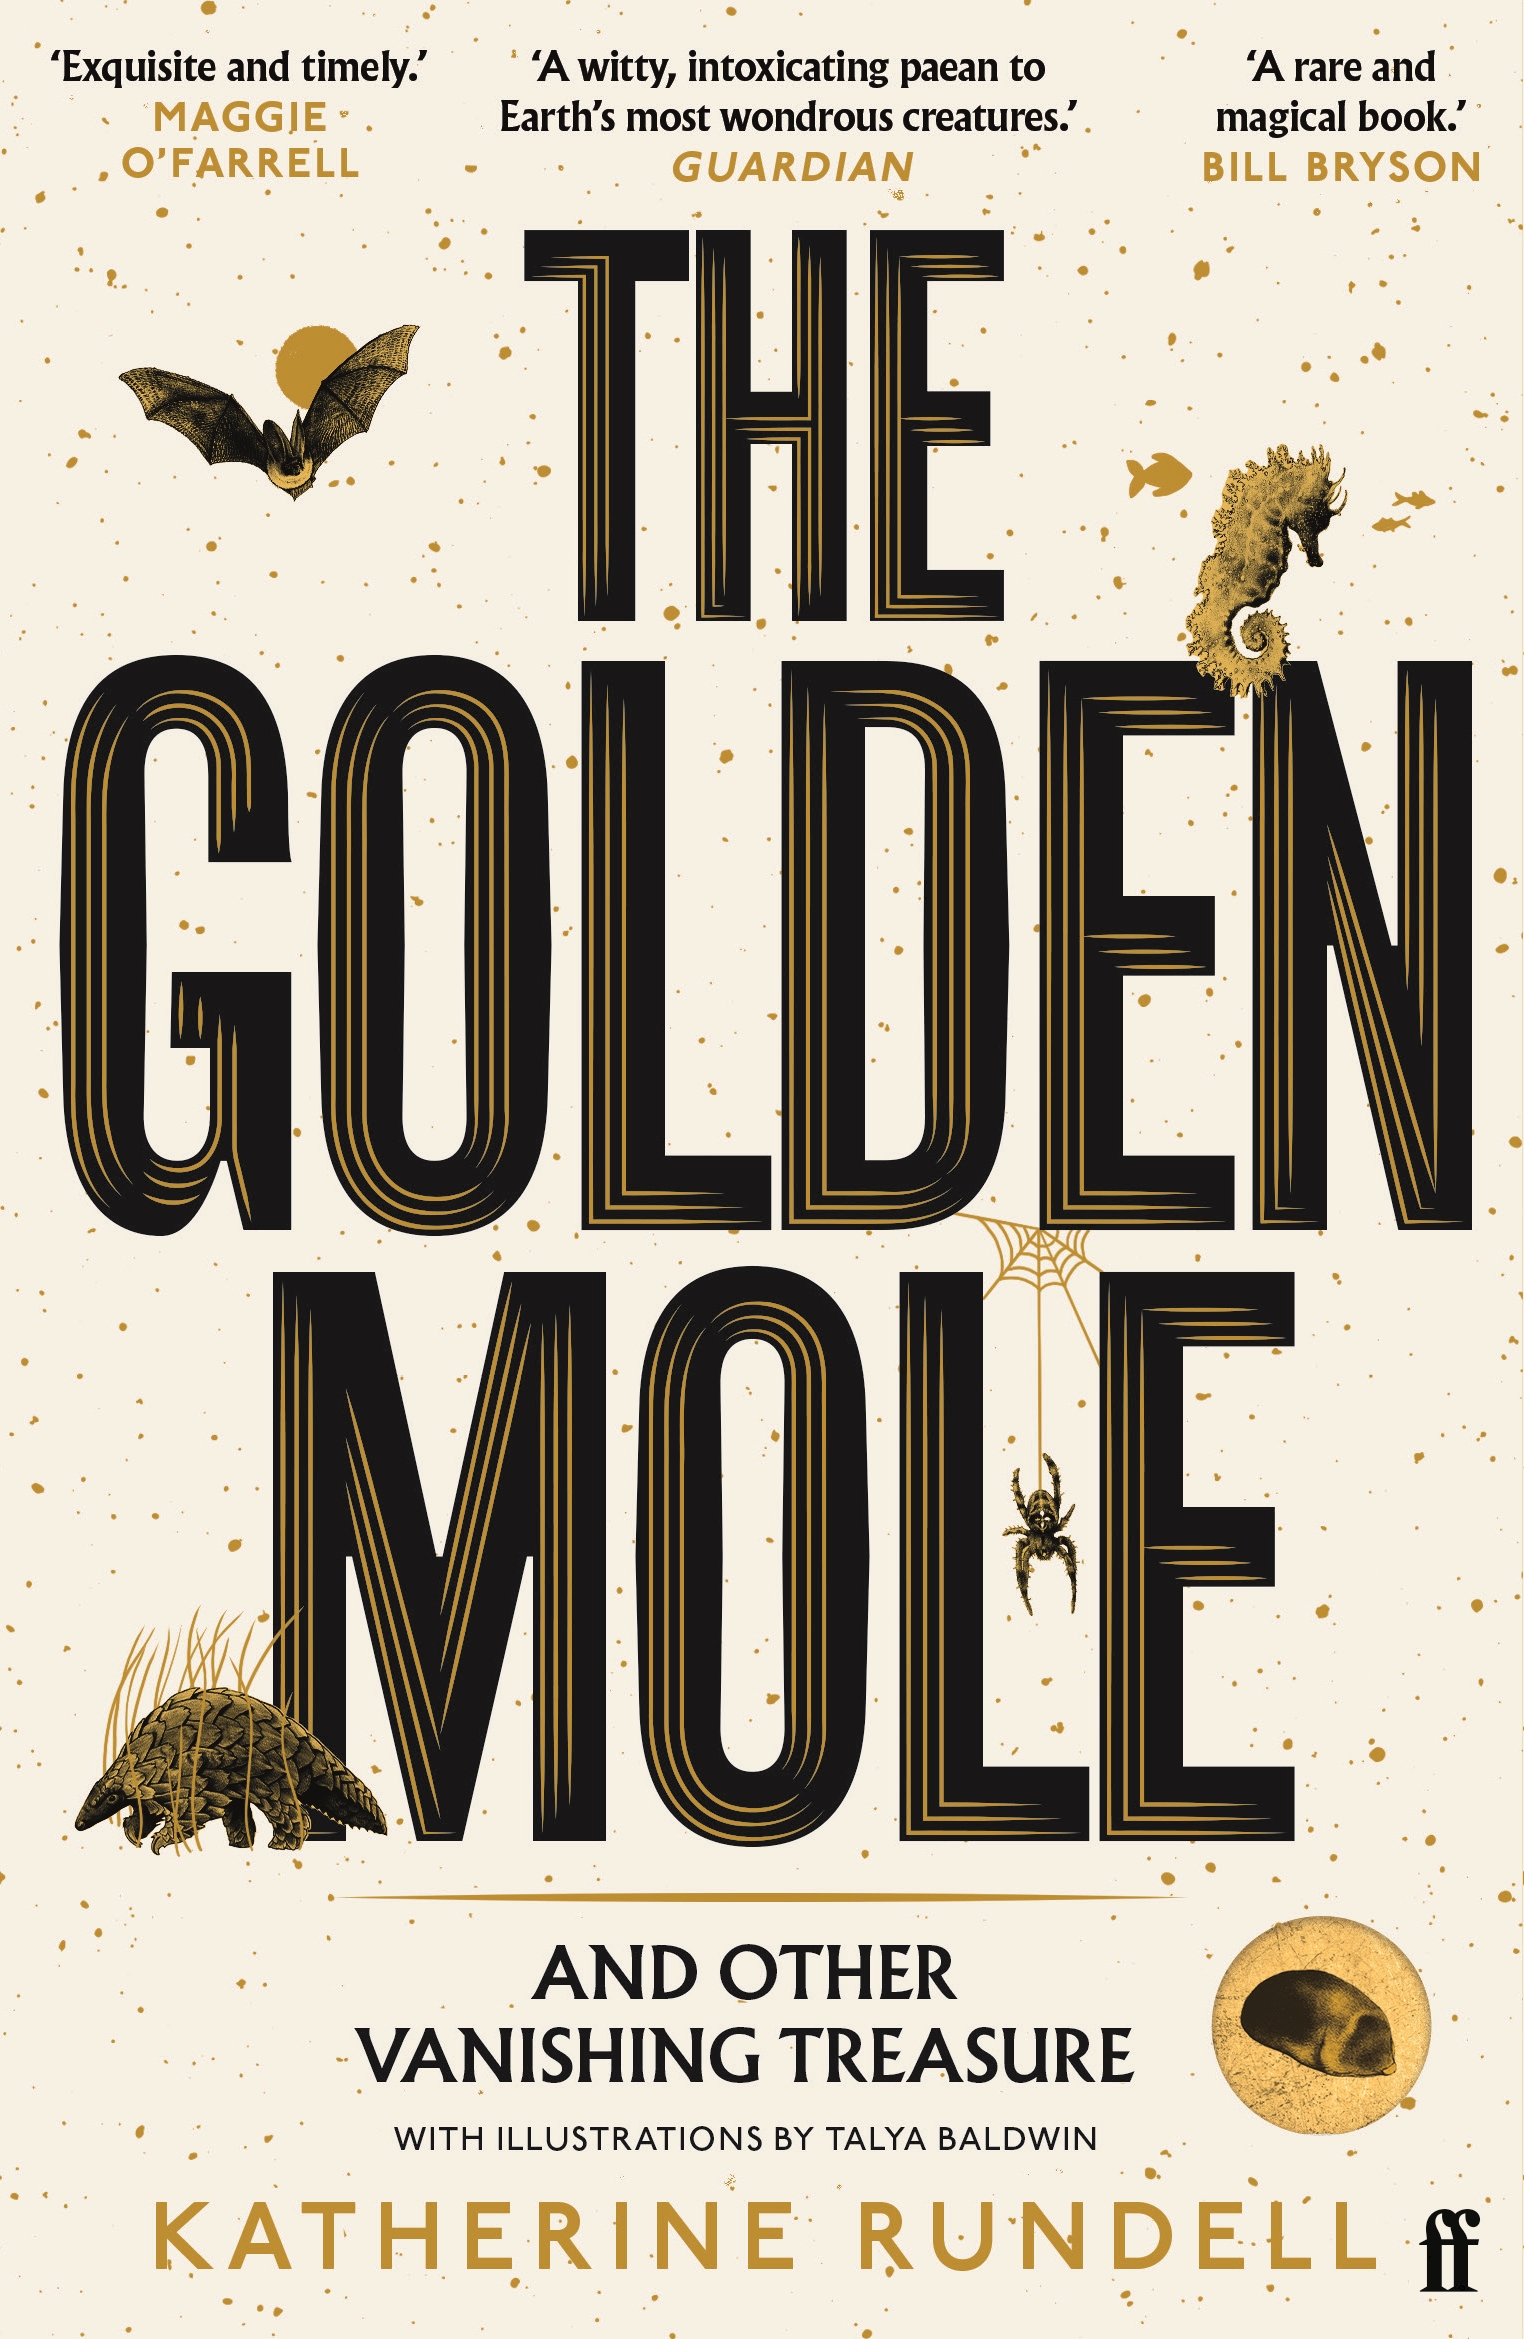 The front cover of The Golden Mole by Katherine Rundell, which is in a design which features a number of animals